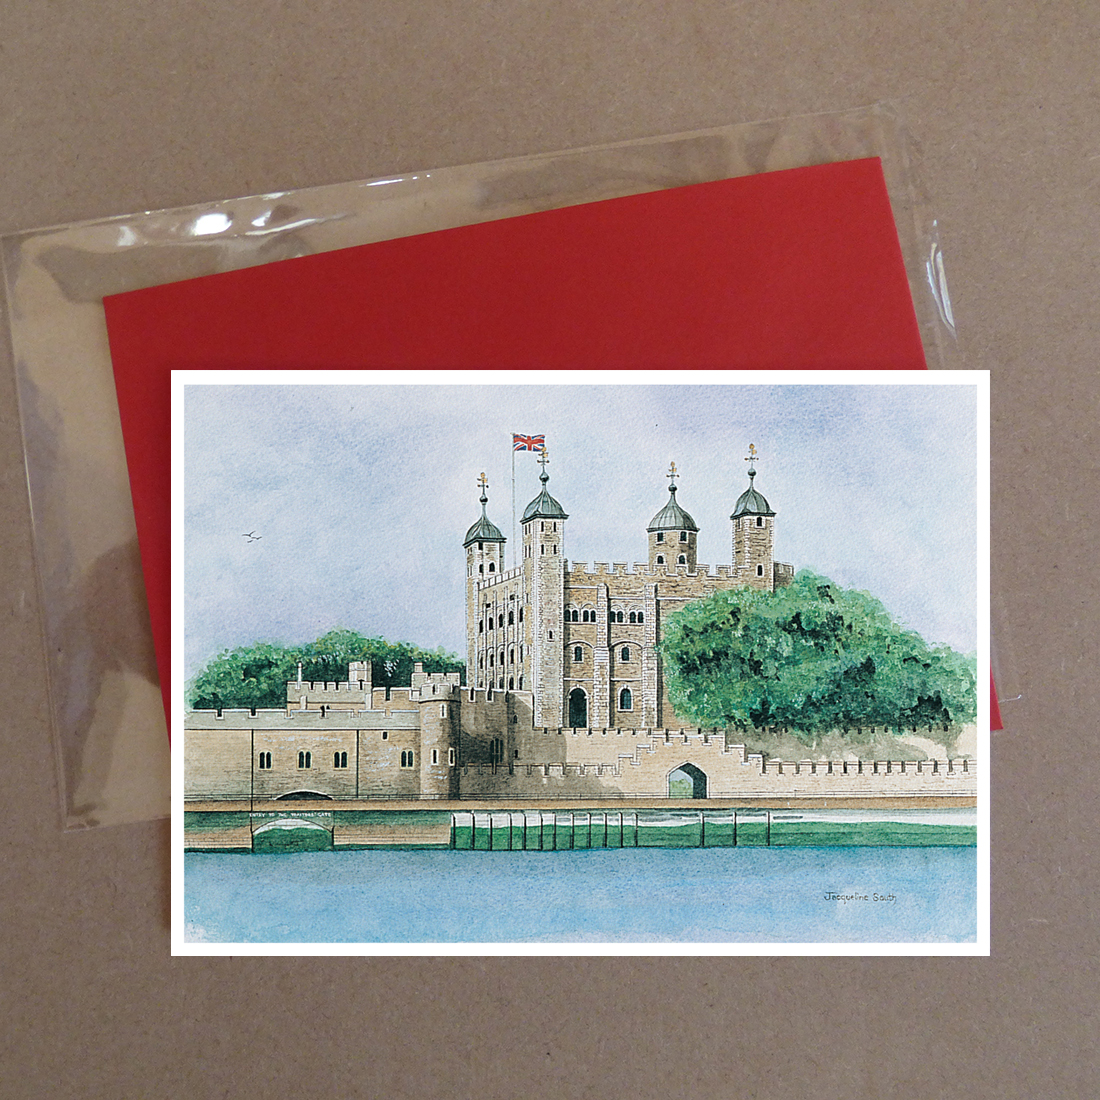 Tower of London Greeting Card